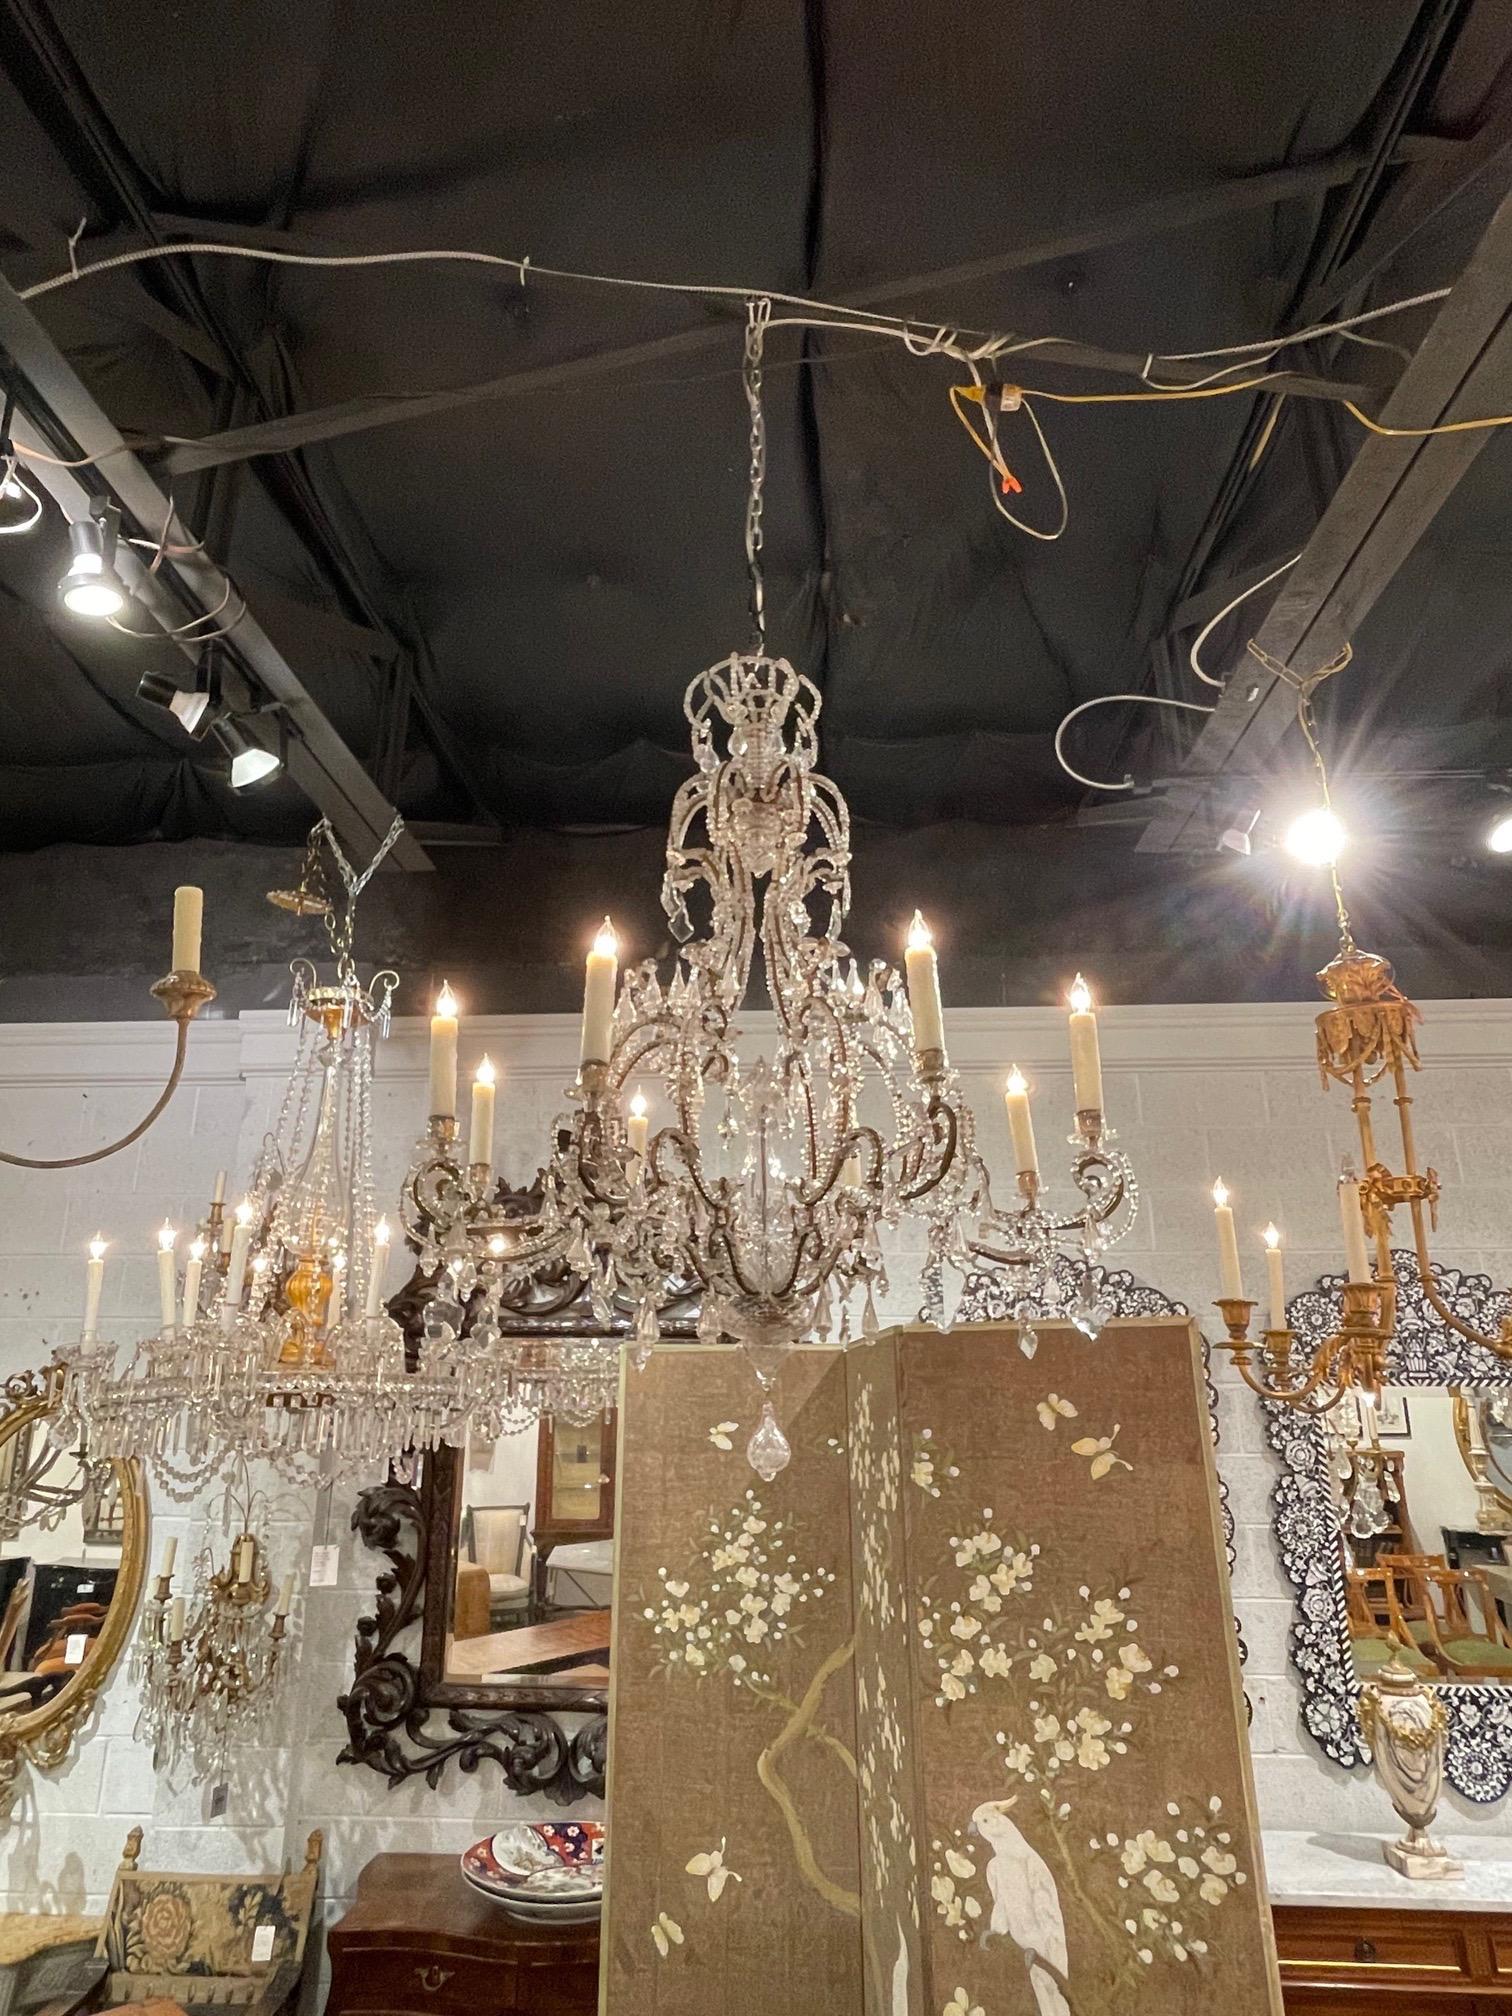 Gorgeous 19th century Italian beaded and crystal chandelier with 8 lights. The lovely curved base is covered in beads and there is multitude of dangling prisms. This sparkling beauty is very impressive!!